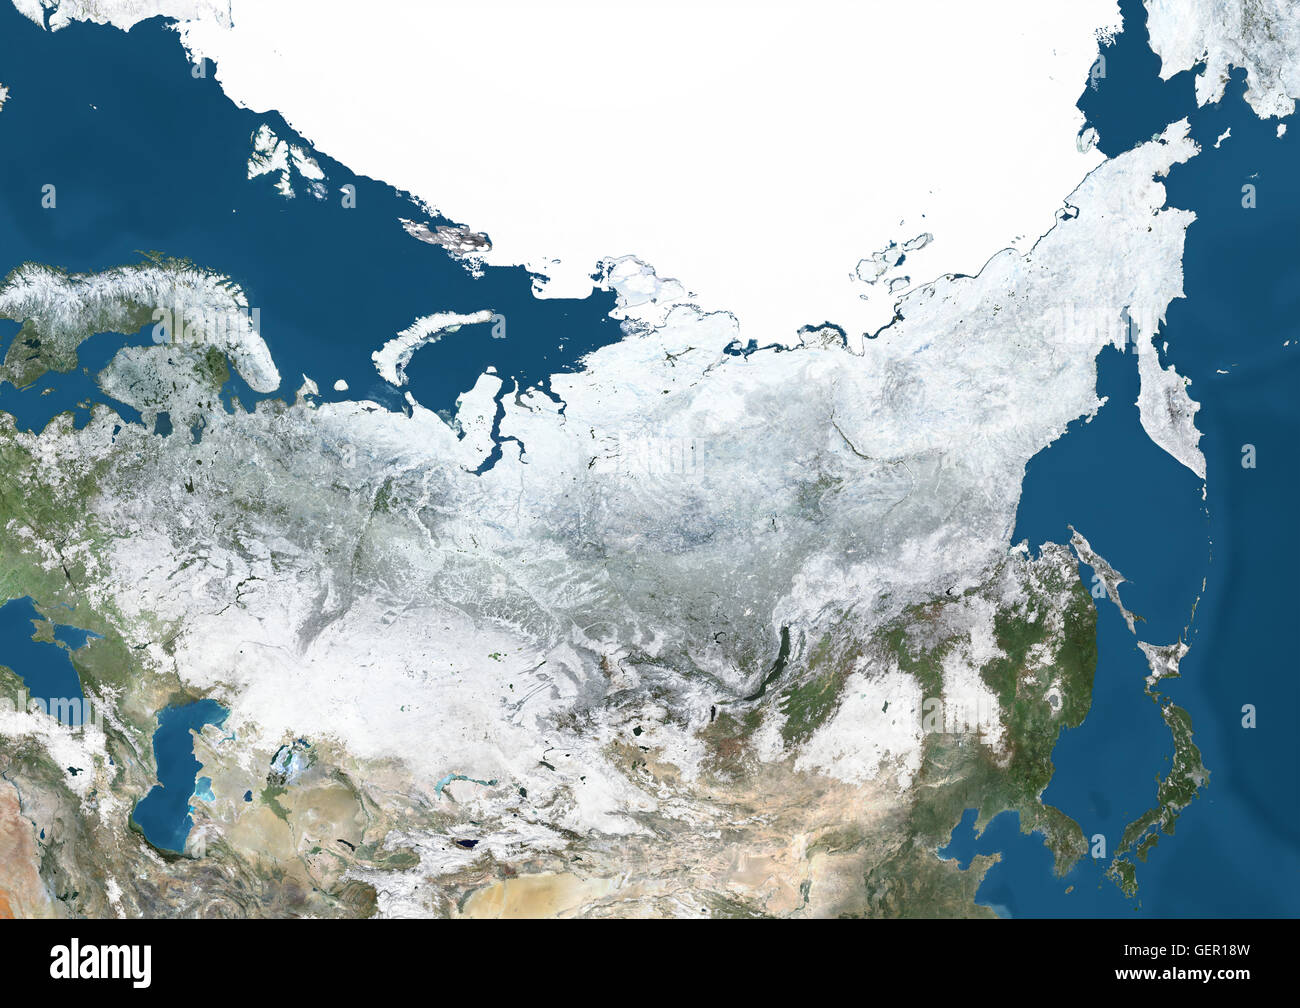 Satellite view of Russia and Central Asia in winter, with partial snow cover and Arctic ice cap. This image was compiled from data acquired by Landsat 7 & 8 satellites. Stock Photo